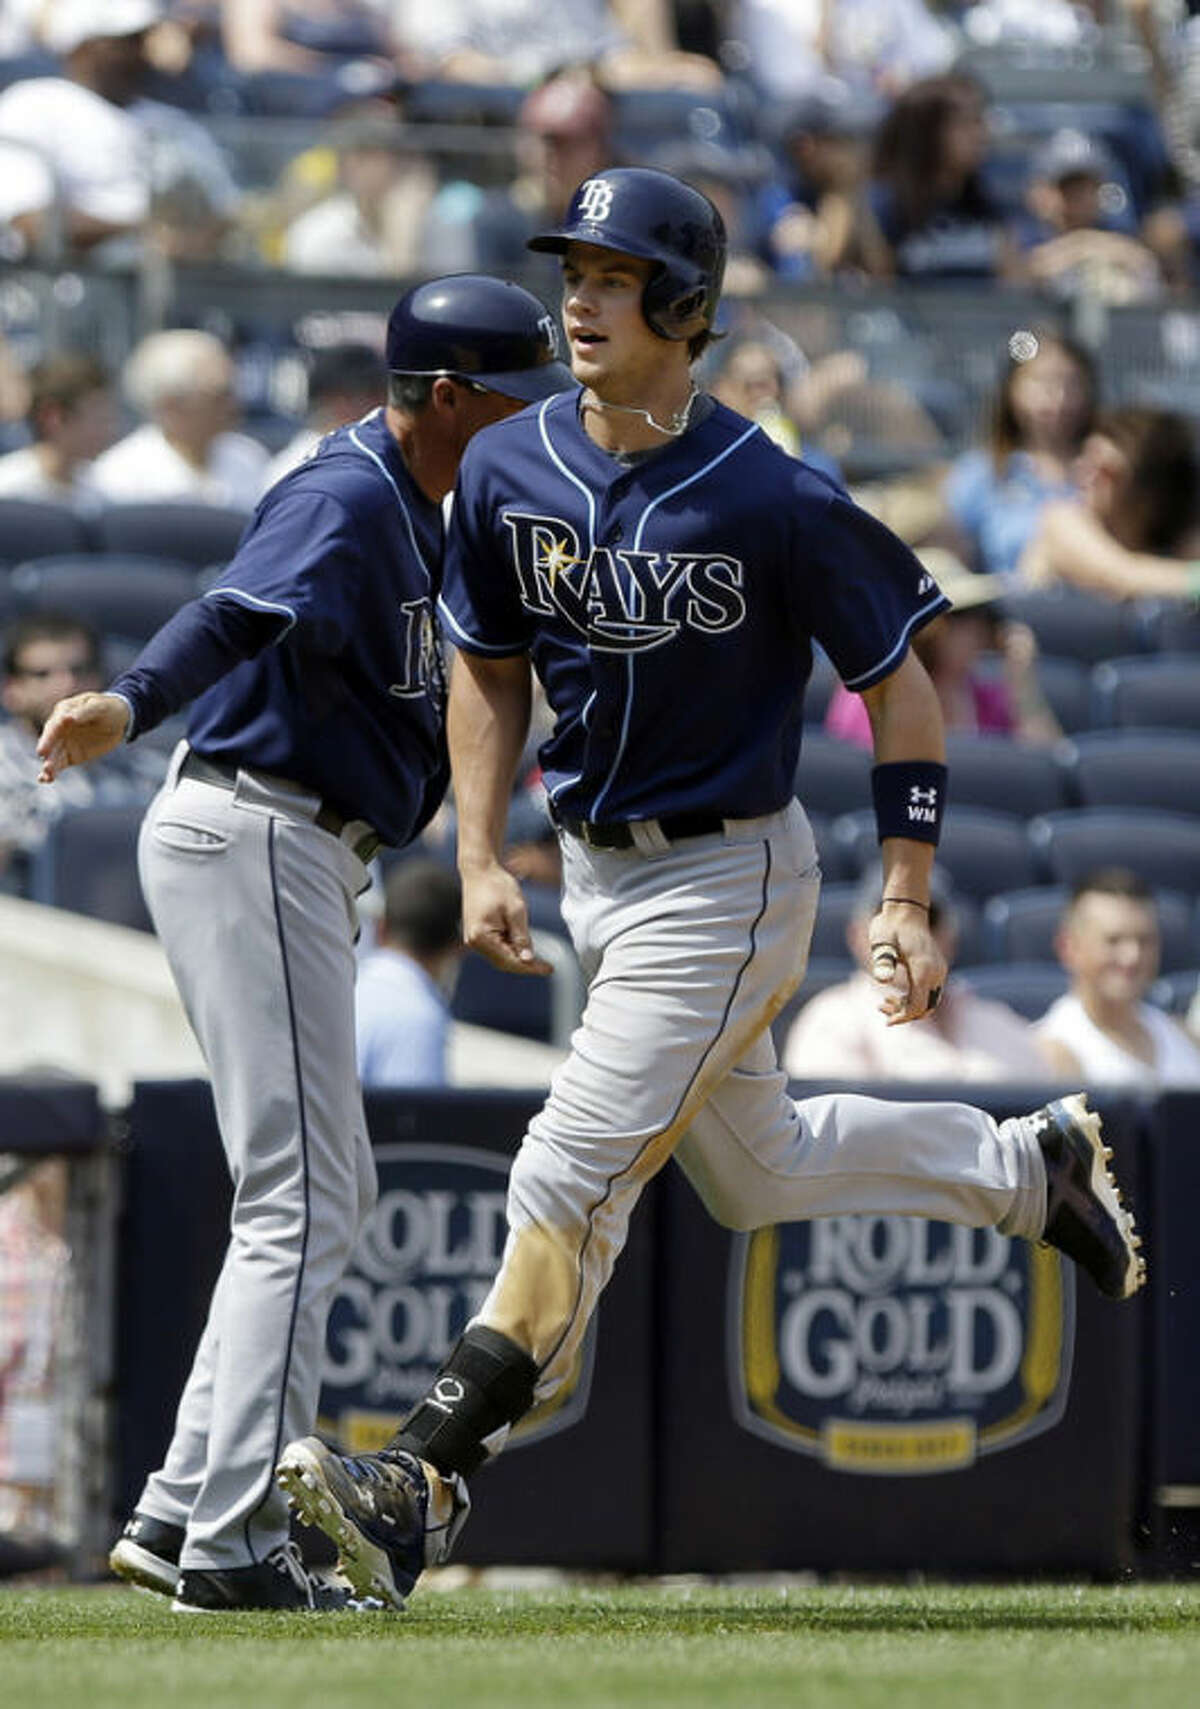 Tampa Bay Rays' Wil Myers heads to home plate after hitting a grand slam during the sixth inning of a baseball game Saturday, June 22, 2013, in New York. (AP Photo/Frank Franklin II)